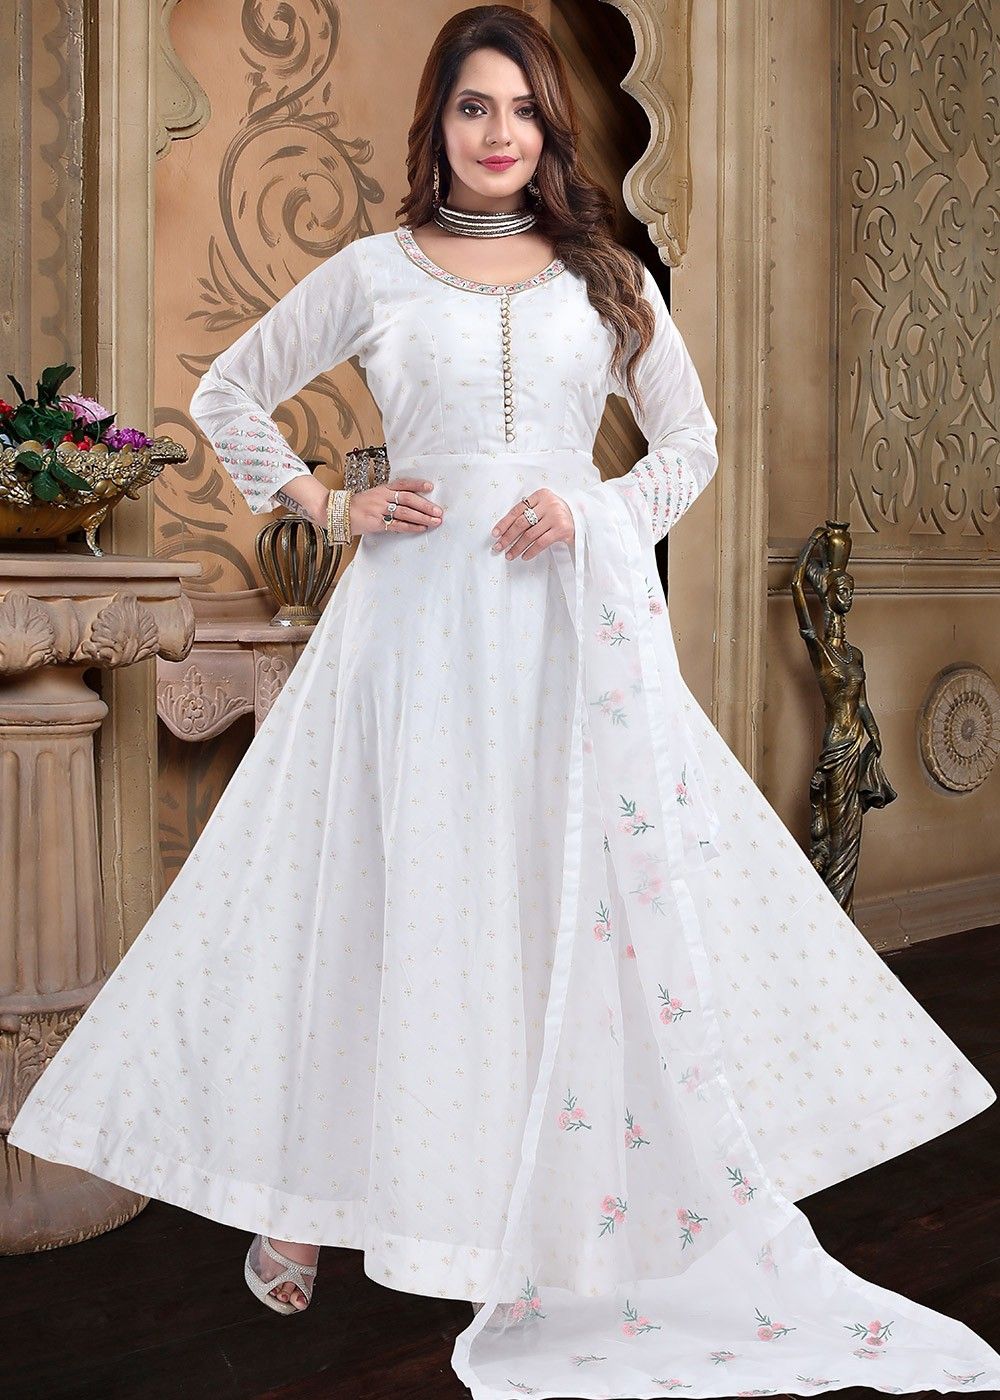 Tips To Select Anarkali Dresses According To Your Personality